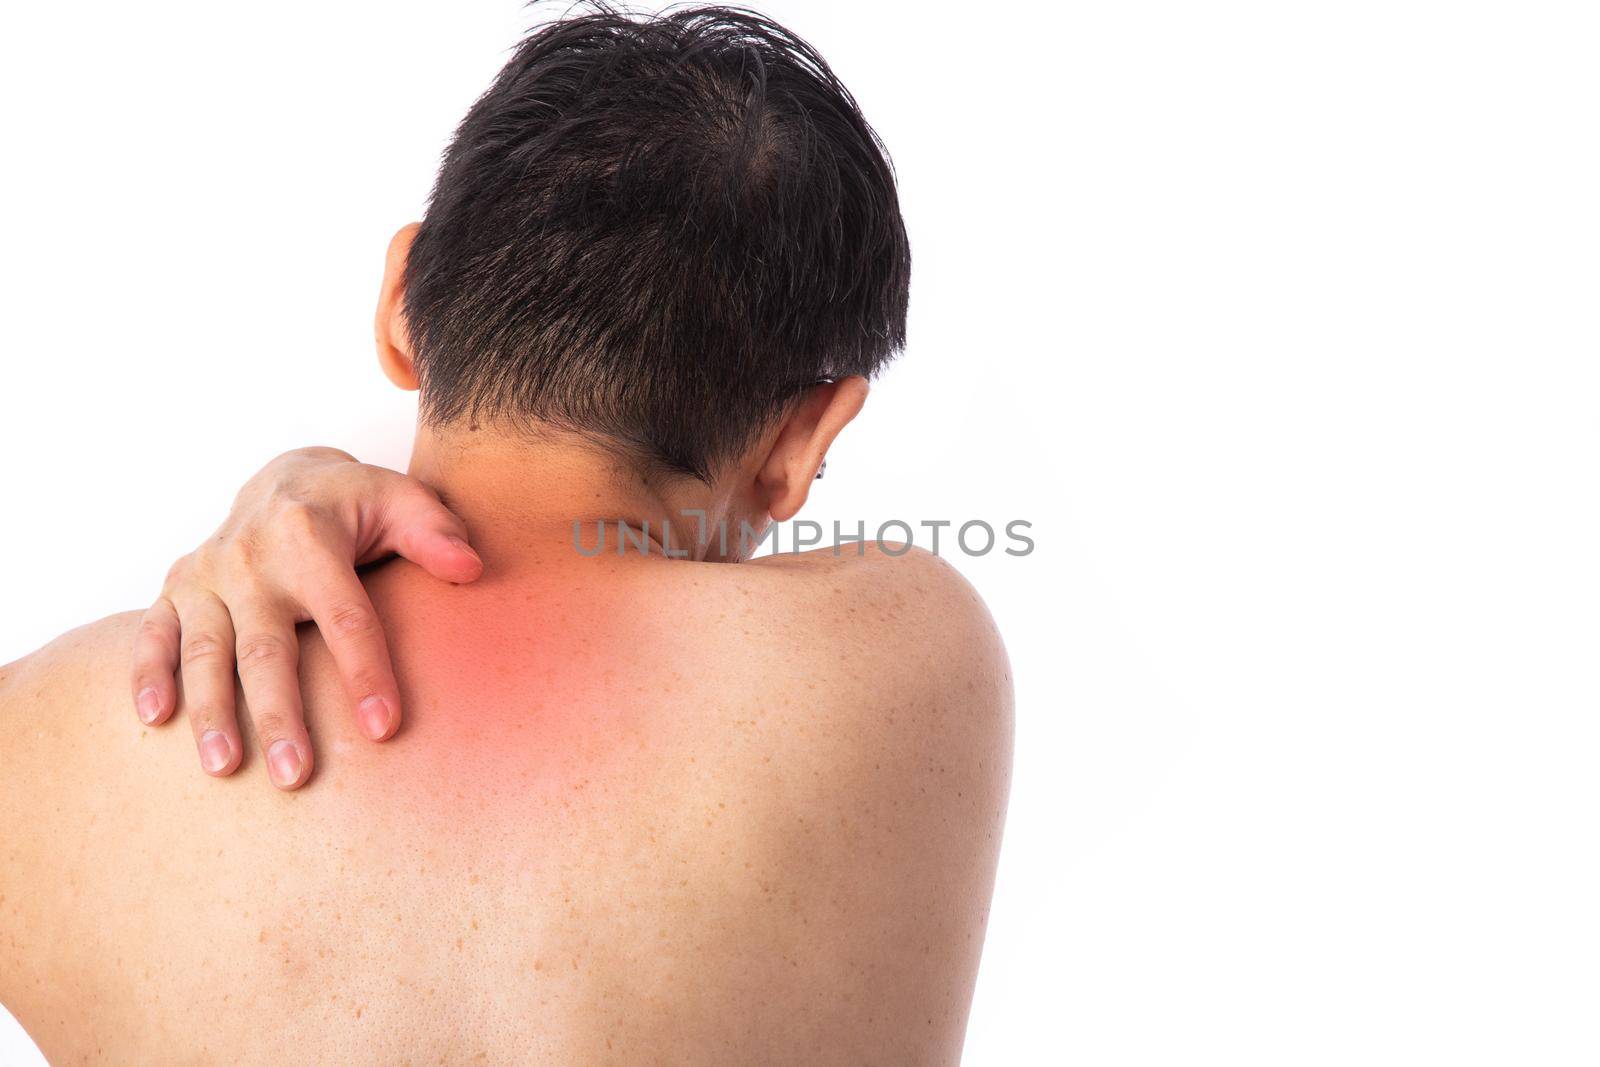 Sore pain of shoulder. Sprain and arthritis symptoms. middle age man holding his hurt shoulder by tehcheesiong